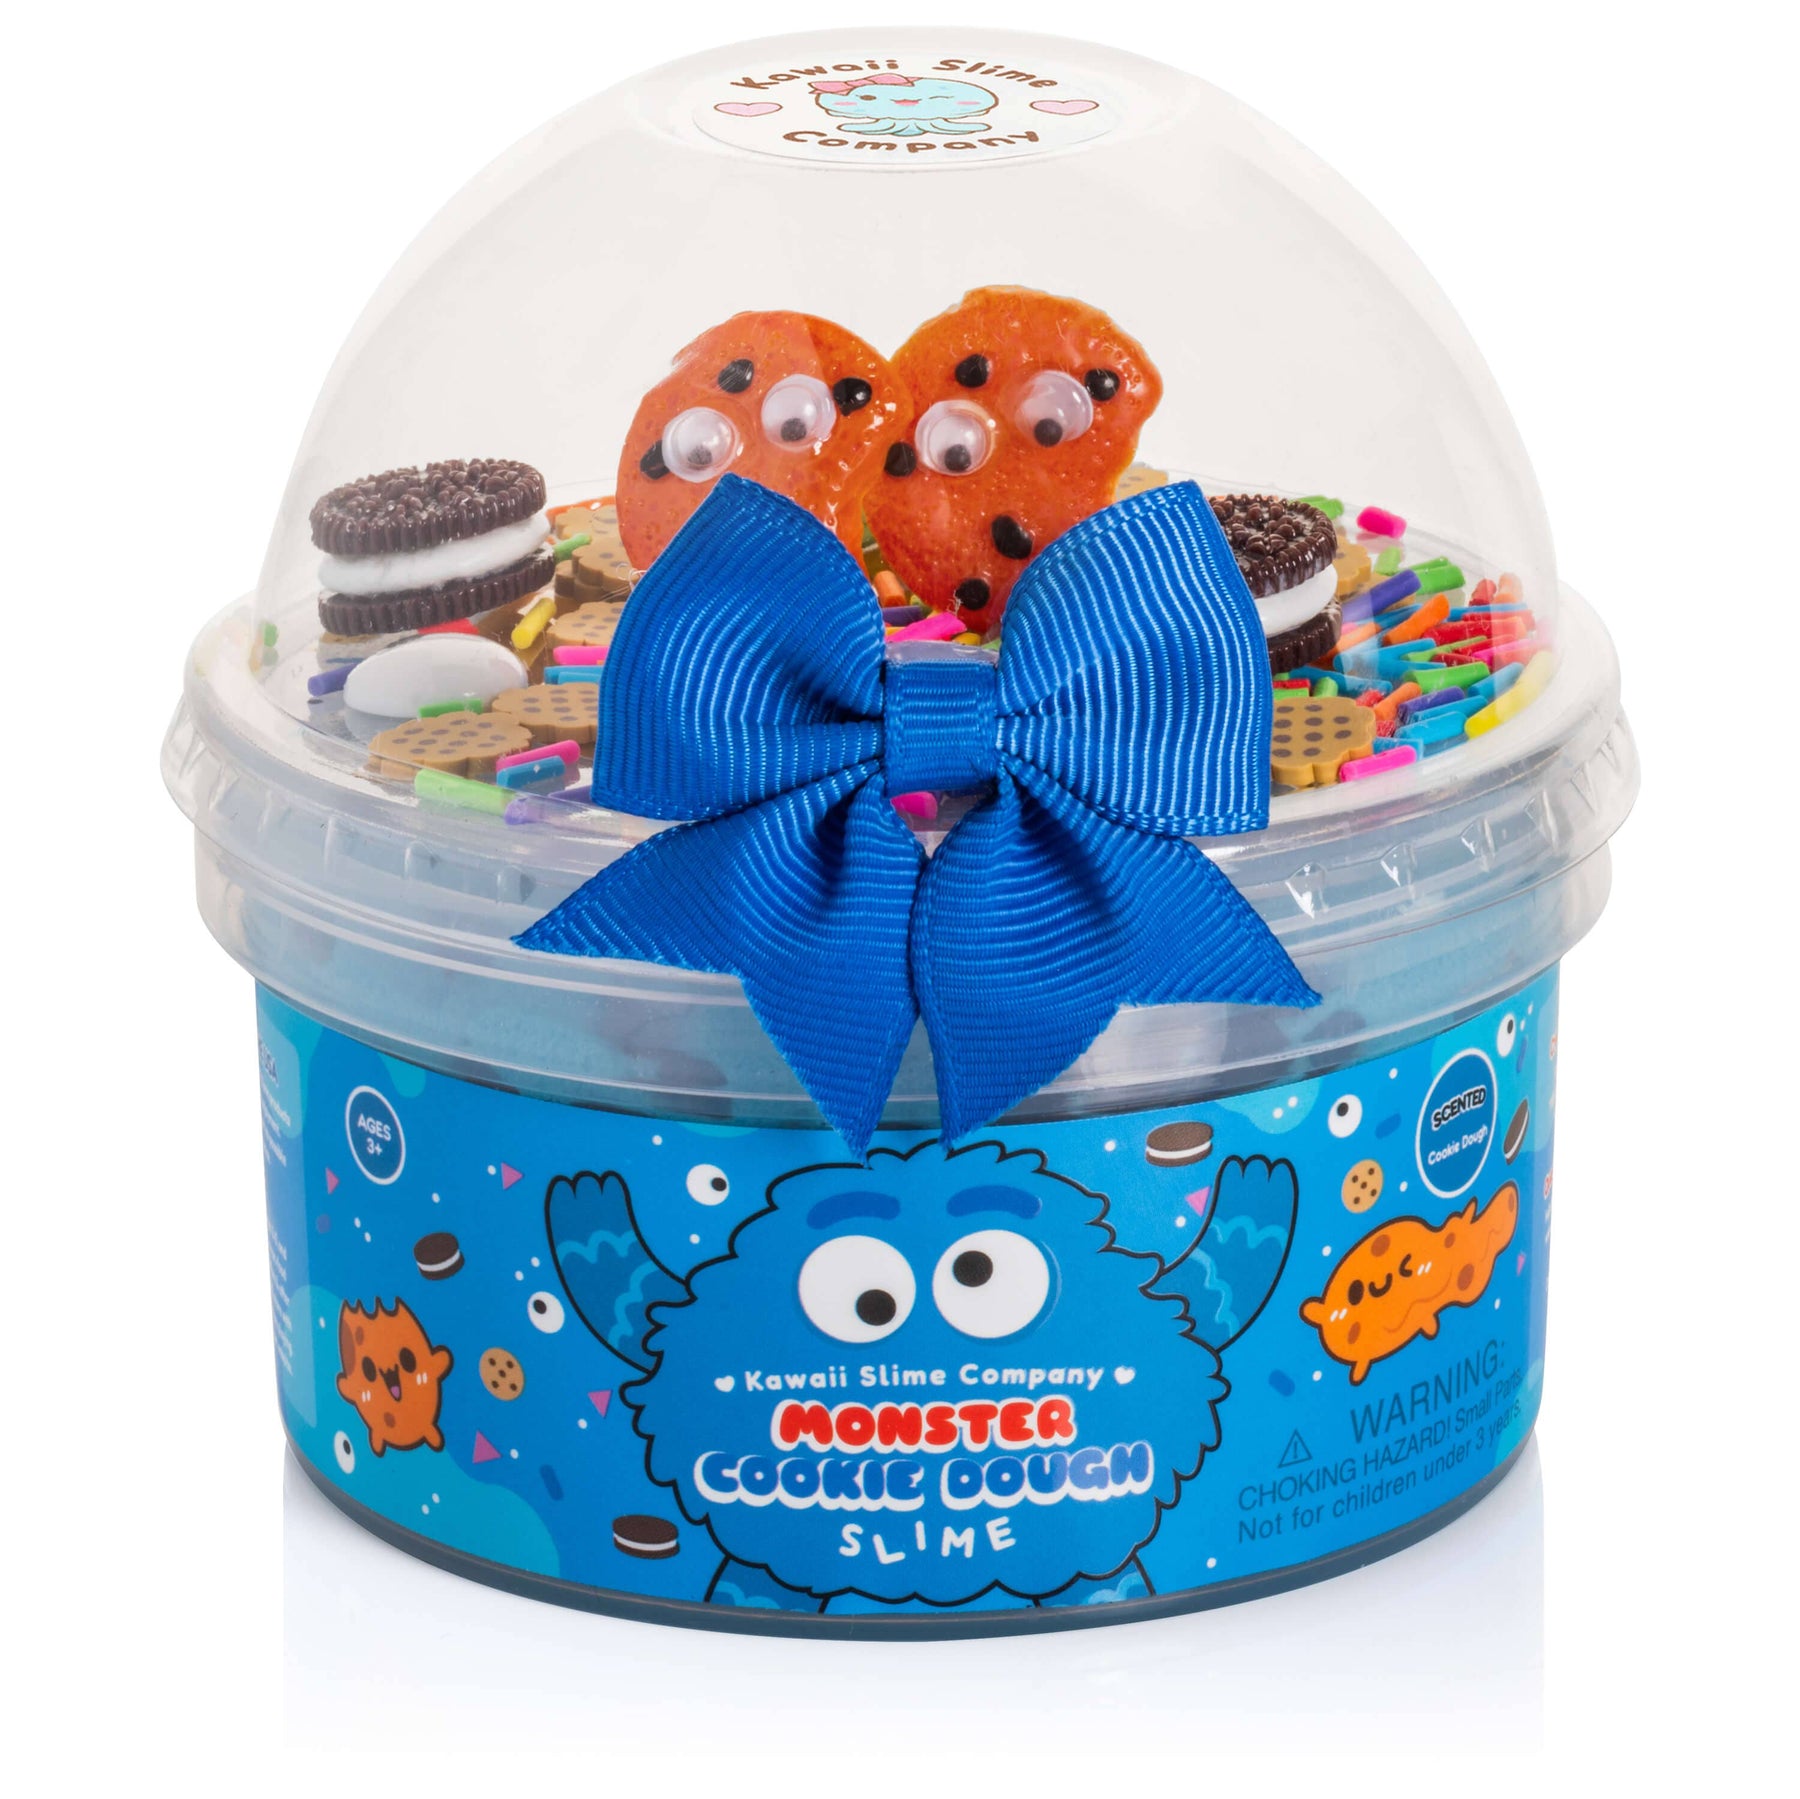 A container of Monster Cookie Dough Slime with cookie charms and inspired toppings, featuring a vibrant blue hue. Satisfy your senses with this fun, scented Slime.